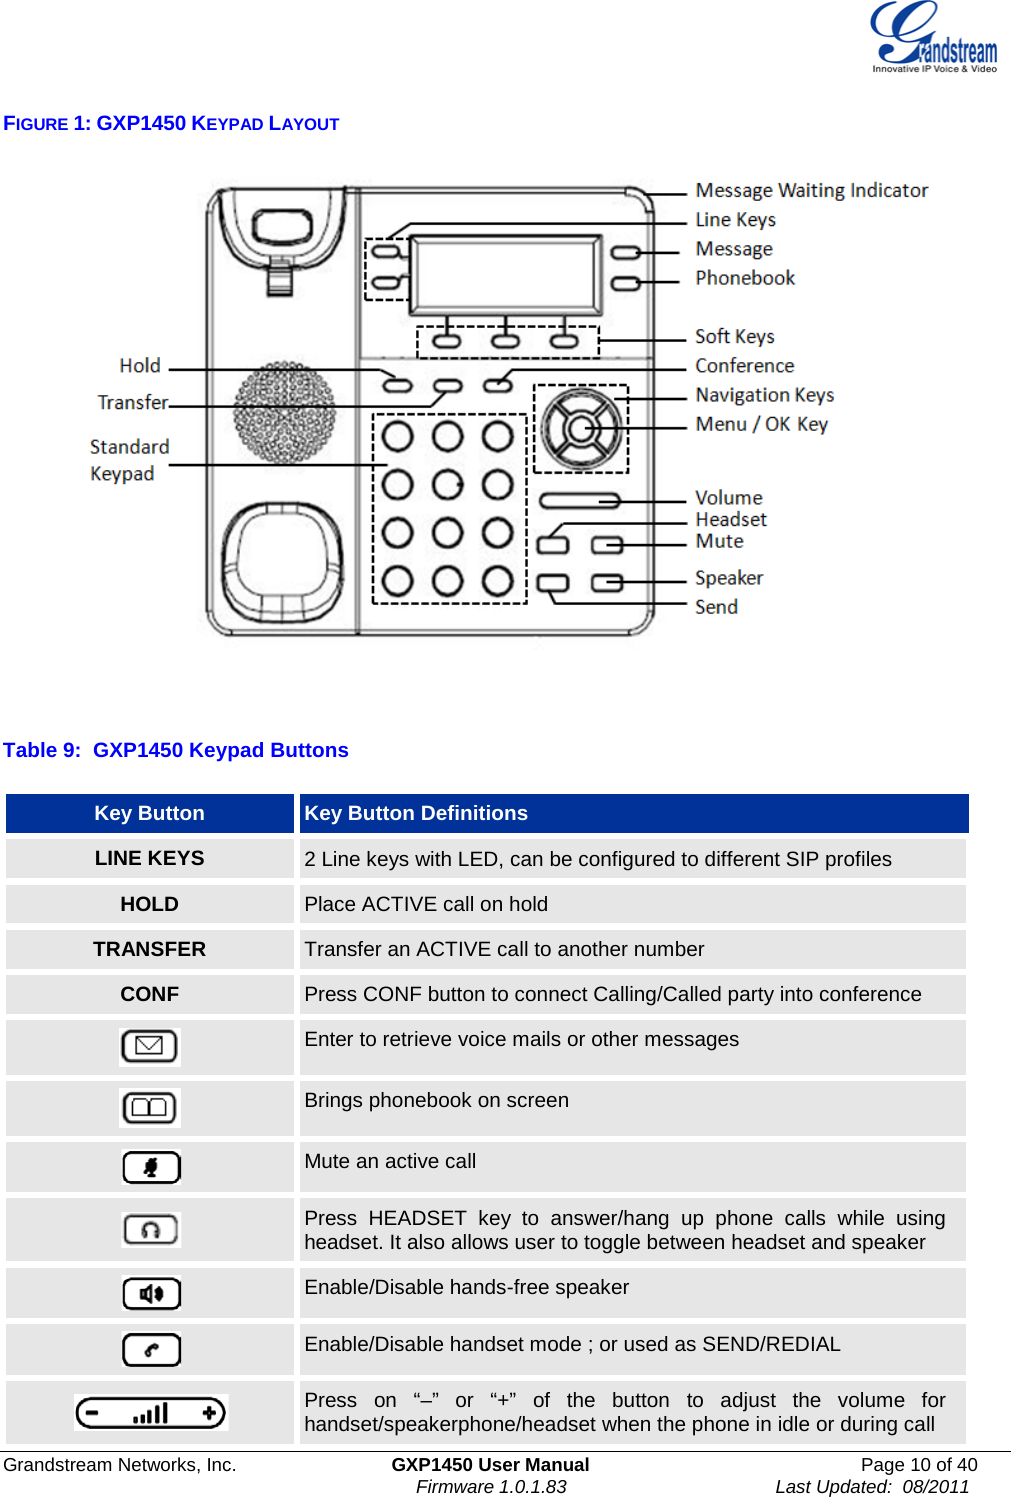  Grandstream Networks, Inc. GXP1450 User Manual Page 10 of 40                                                                         Firmware 1.0.1.83                                        Last Updated:  08/2011  FIGURE 1: GXP1450 KEYPAD LAYOUT   Table 9:  GXP1450 Keypad Buttons Key Button Key Button Definitions LINE KEYS 2 Line keys with LED, can be configured to different SIP profiles HOLD Place ACTIVE call on hold TRANSFER Transfer an ACTIVE call to another number CONF Press CONF button to connect Calling/Called party into conference  Enter to retrieve voice mails or other messages  Brings phonebook on screen  Mute an active call  Press HEADSET key to answer/hang up phone calls while using headset. It also allows user to toggle between headset and speaker  Enable/Disable hands-free speaker  Enable/Disable handset mode ; or used as SEND/REDIAL  Press  on  “–” or “+” of the button to adjust the volume for handset/speakerphone/headset when the phone in idle or during call 